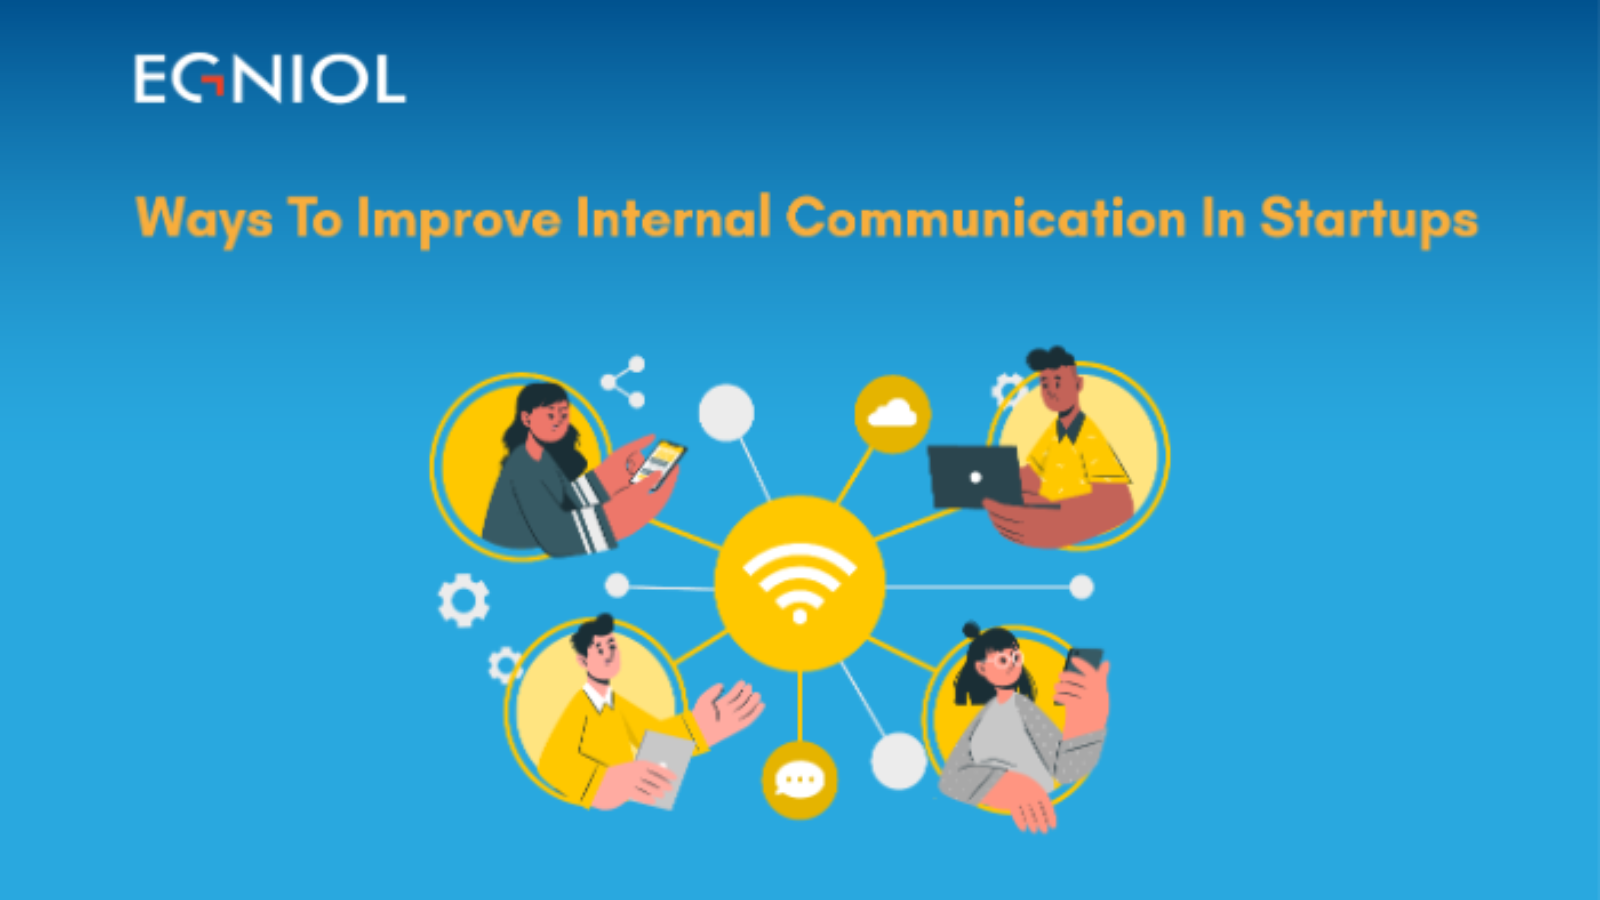 Ways To Improve Internal Communication In Startups - By Egniol